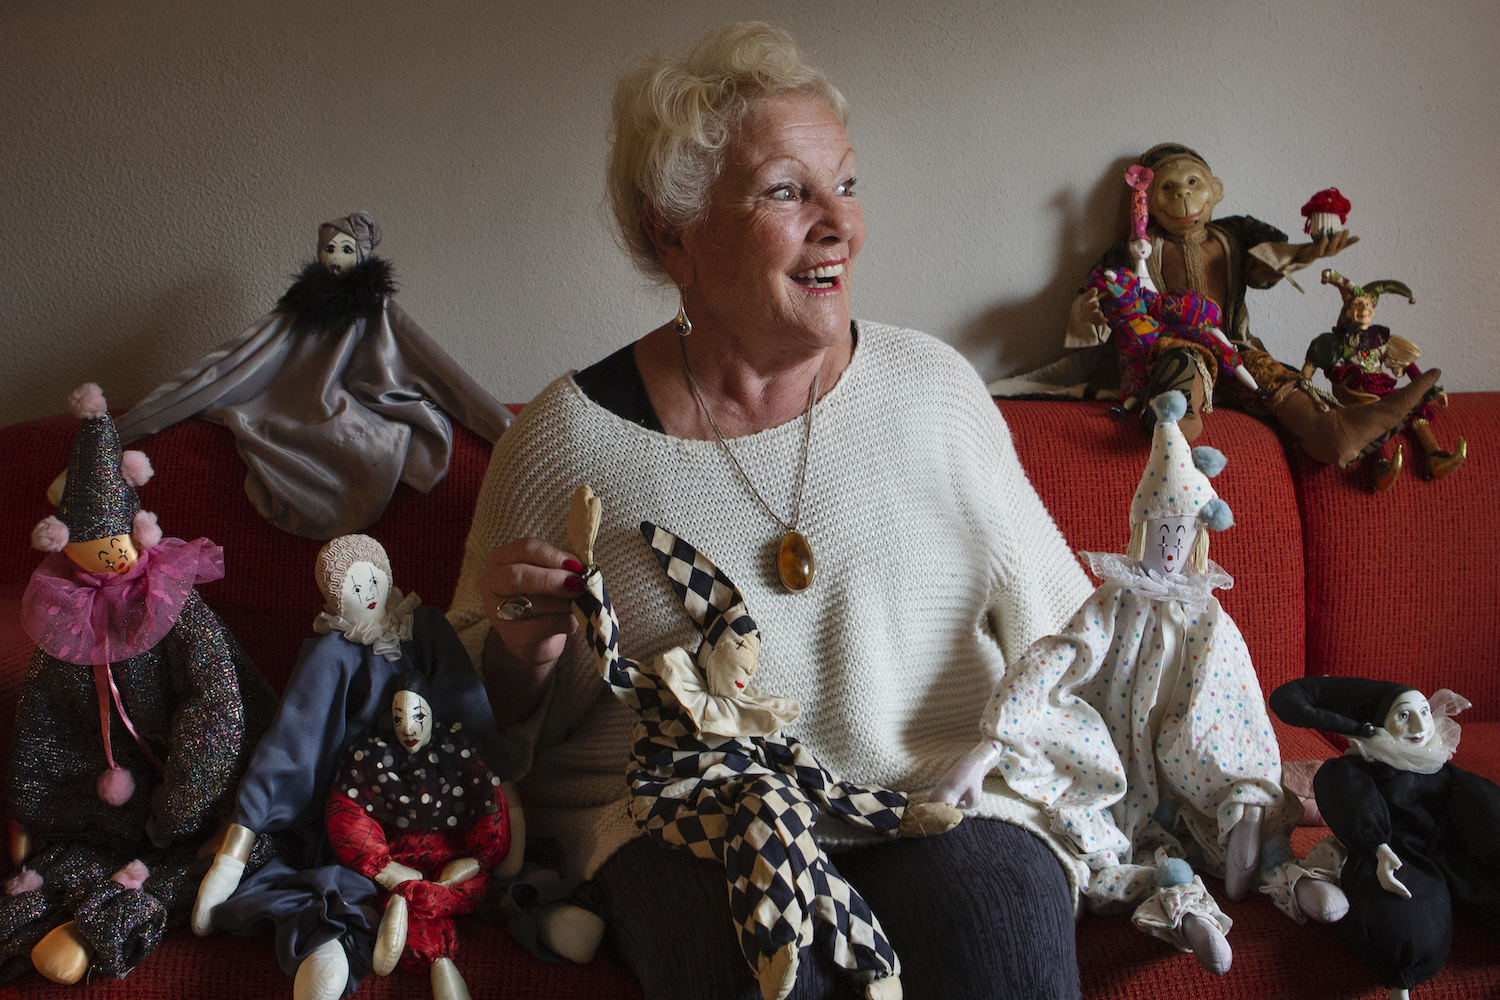 Tilly Berghege smiles around various dolls she has created through the years while sitting on a couch.